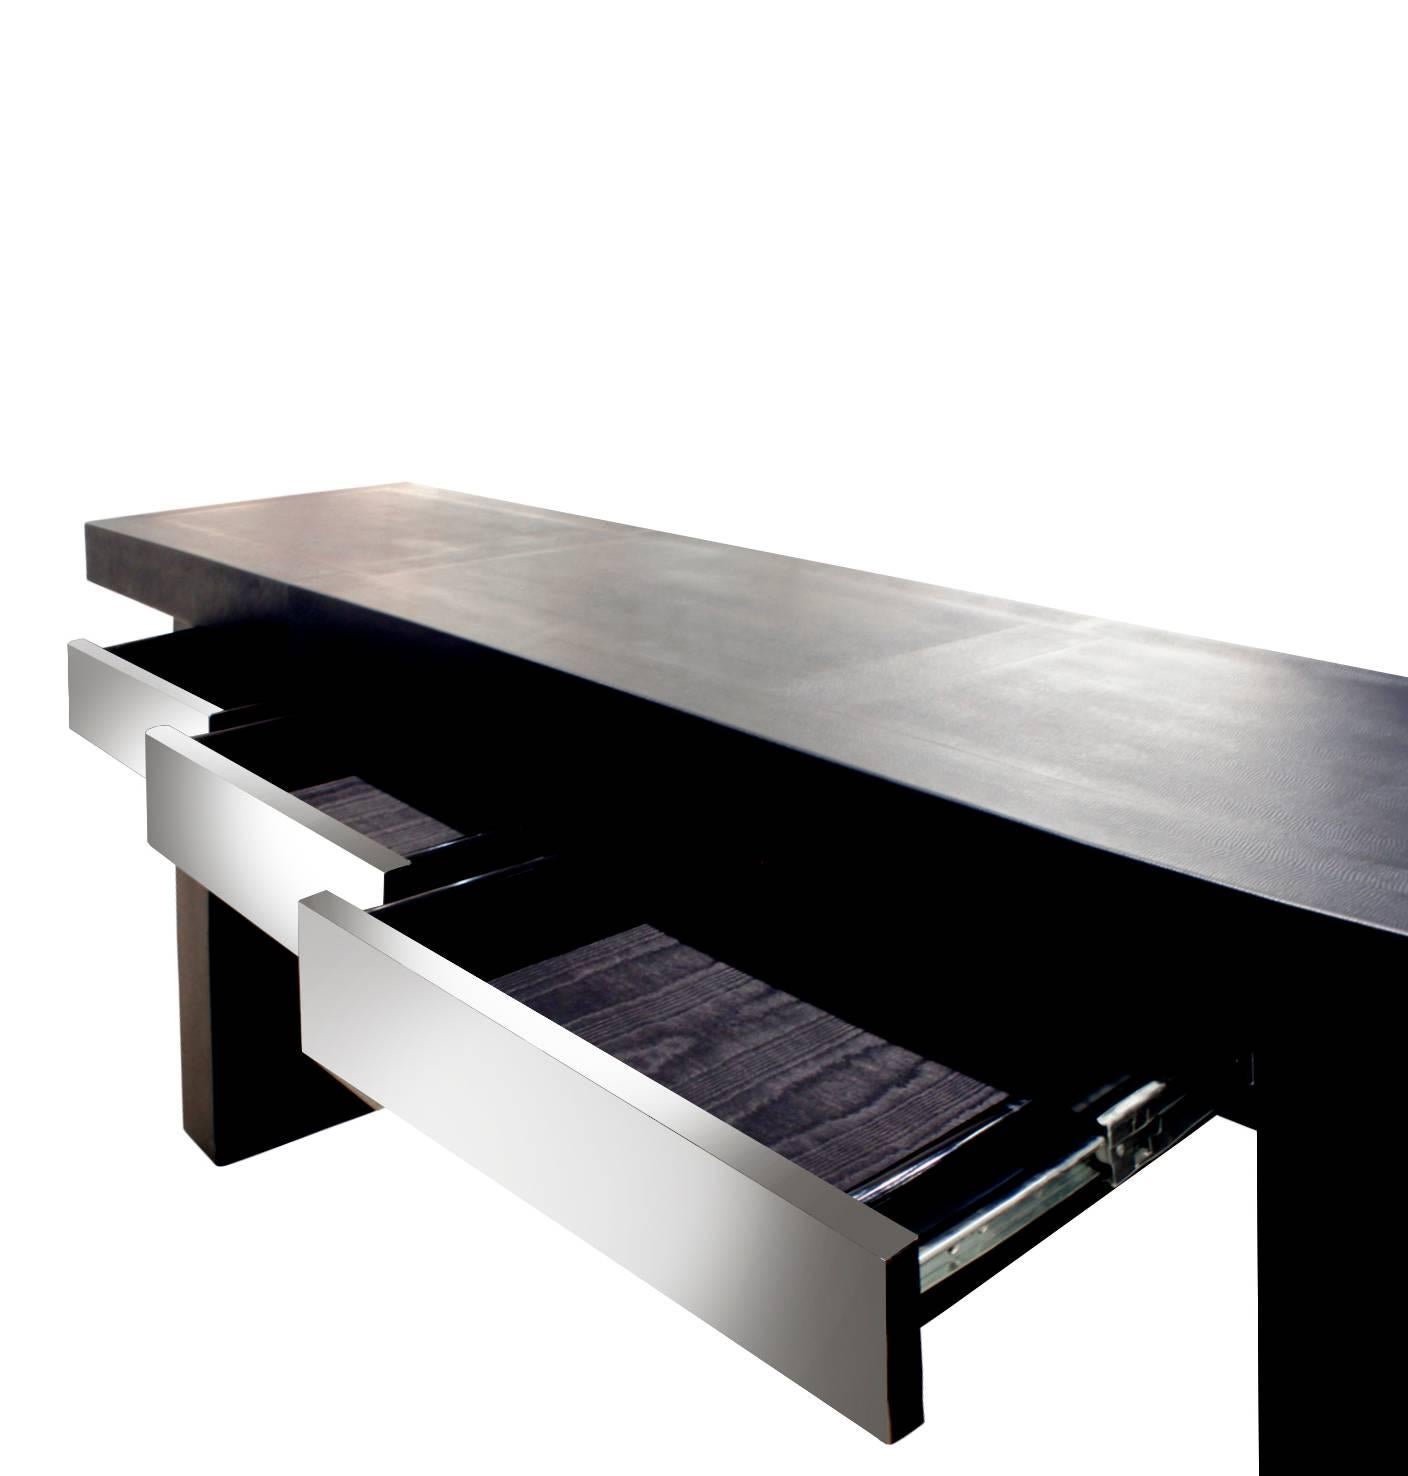 Hand-Crafted Karl Springer Console Table in Embossed Lizard Leather and Gun Metal, 1986